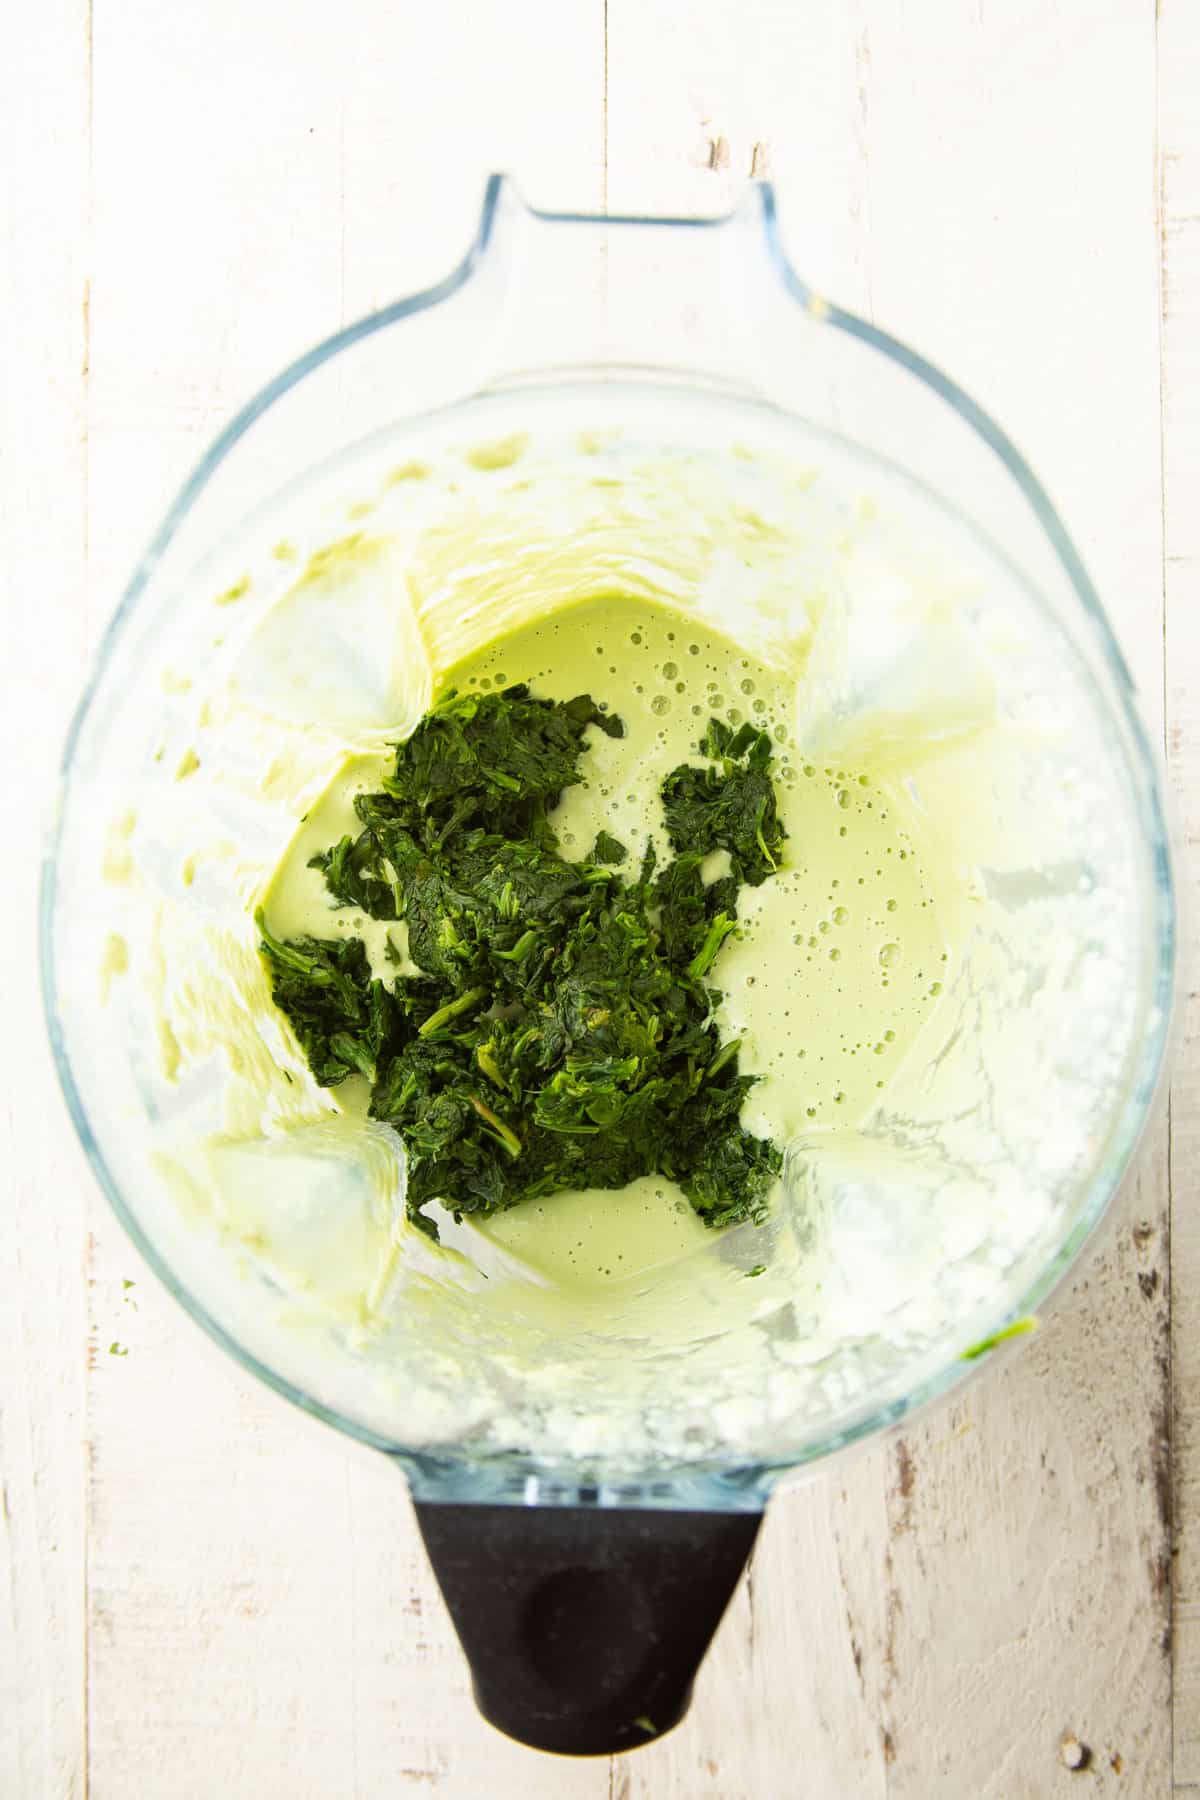 Cashew cream in a blender with spinach.